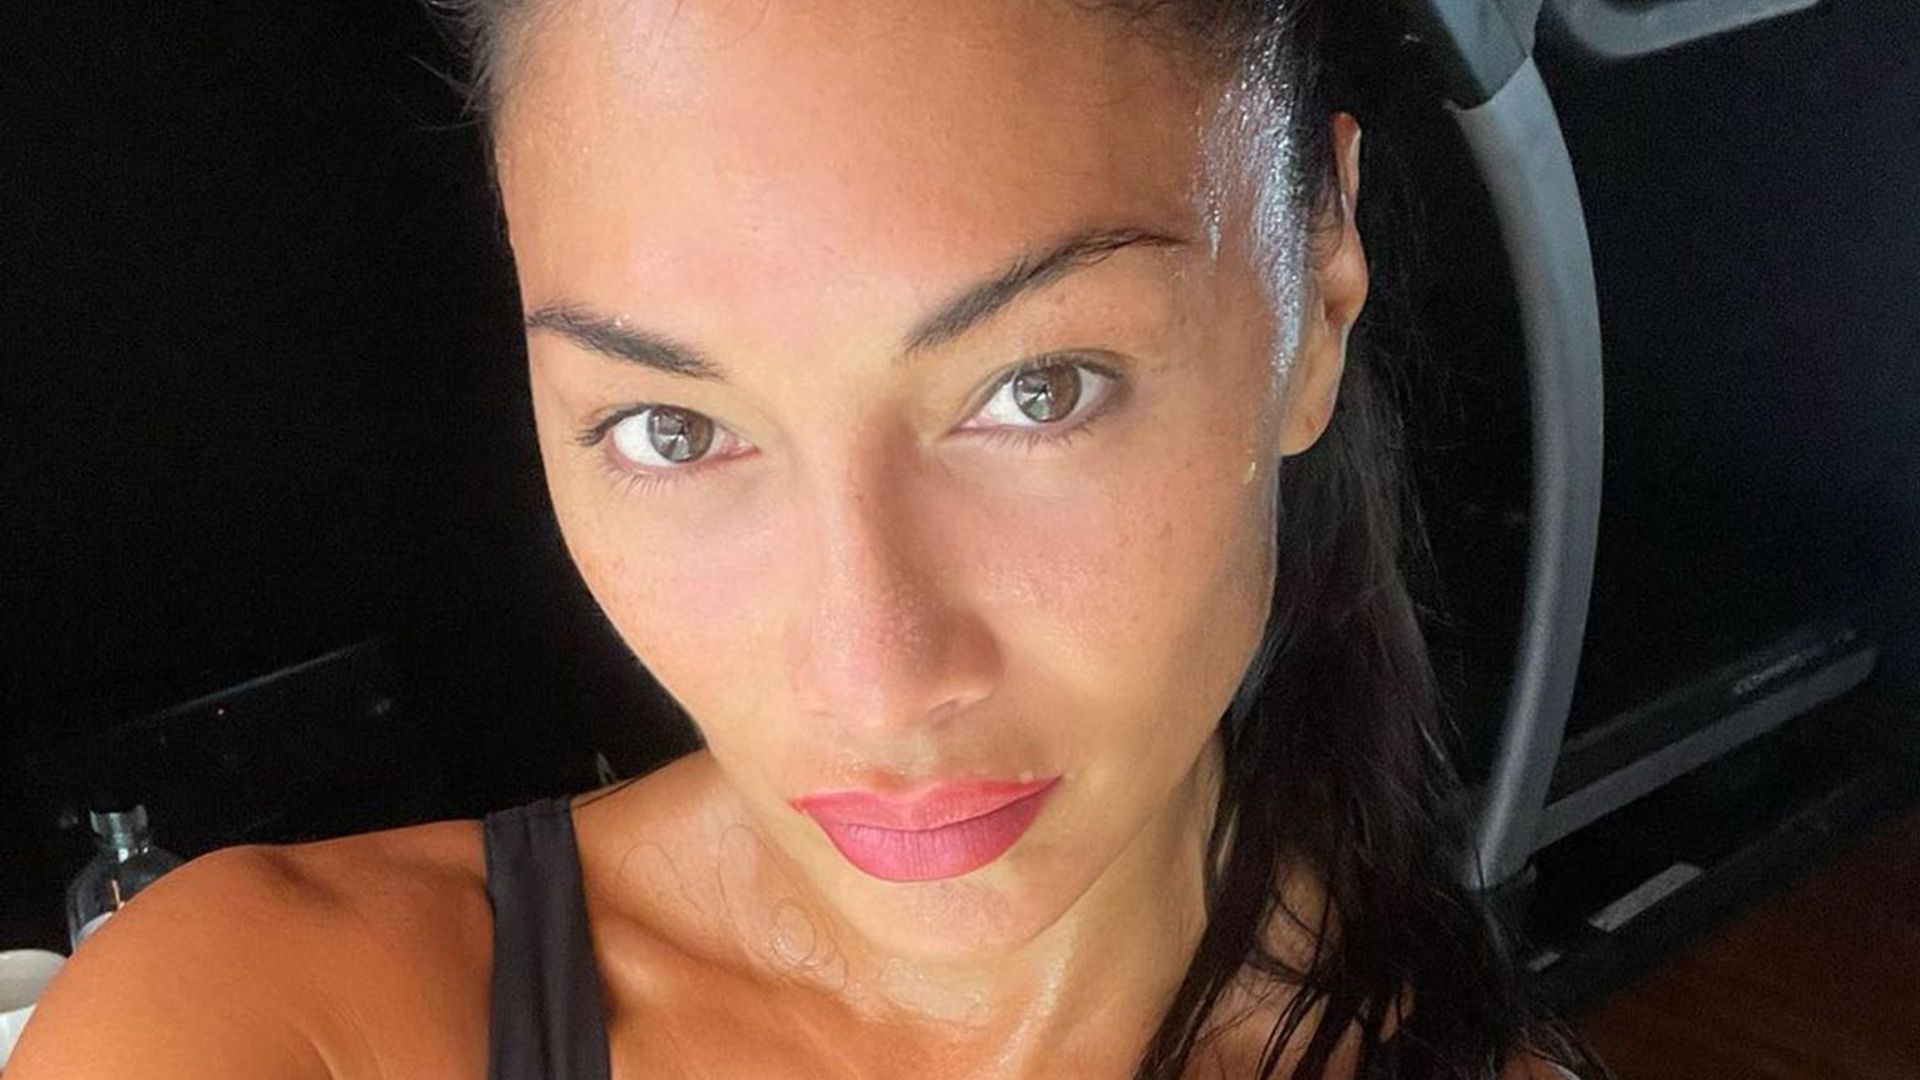 Nicole Scherzinger floors fans with sculpted abs in cheeky workout video